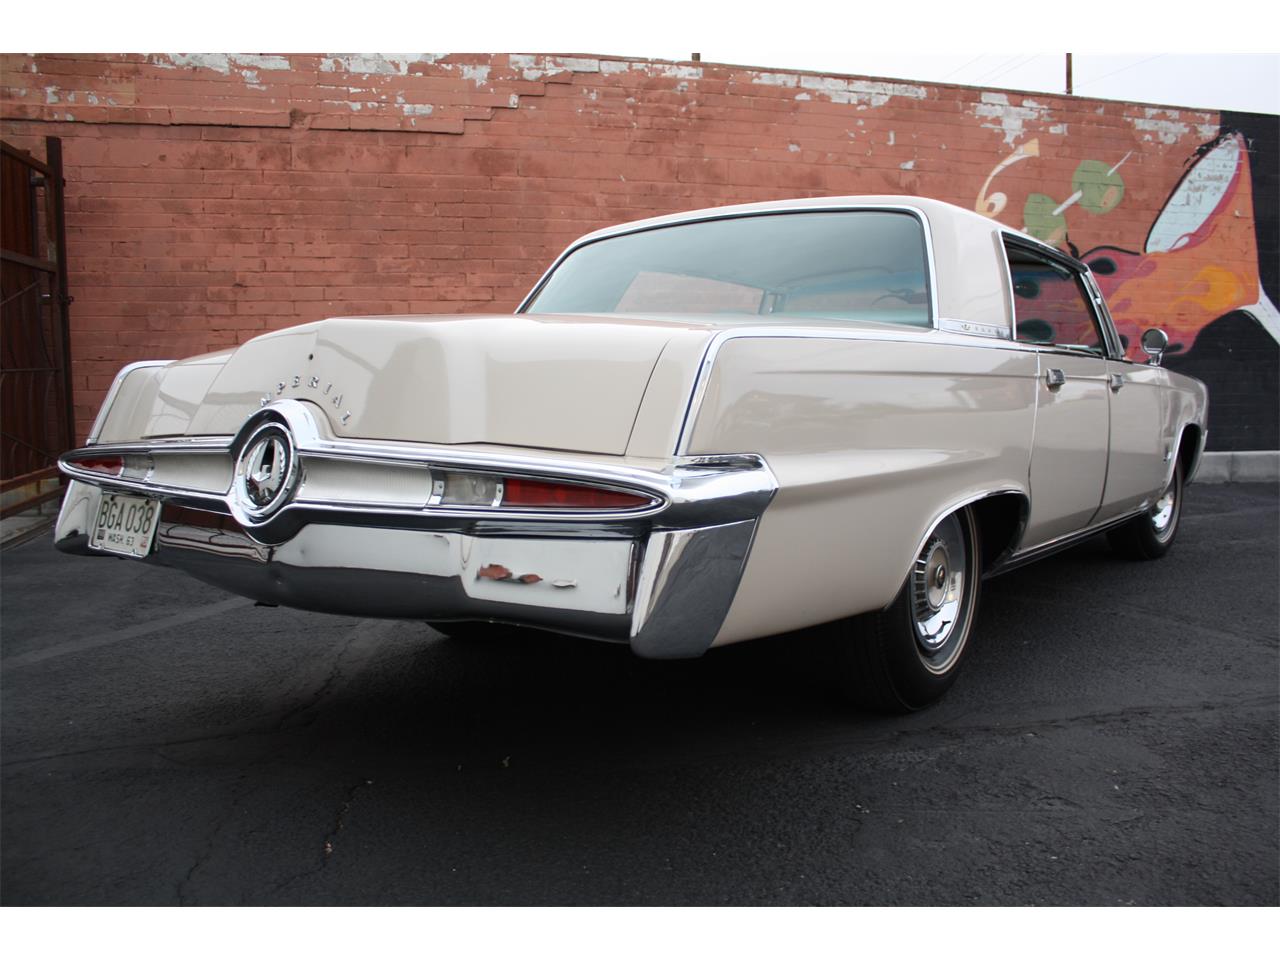 1964 Chrysler Crown Imperial for sale in Tucson, AZ – photo 87